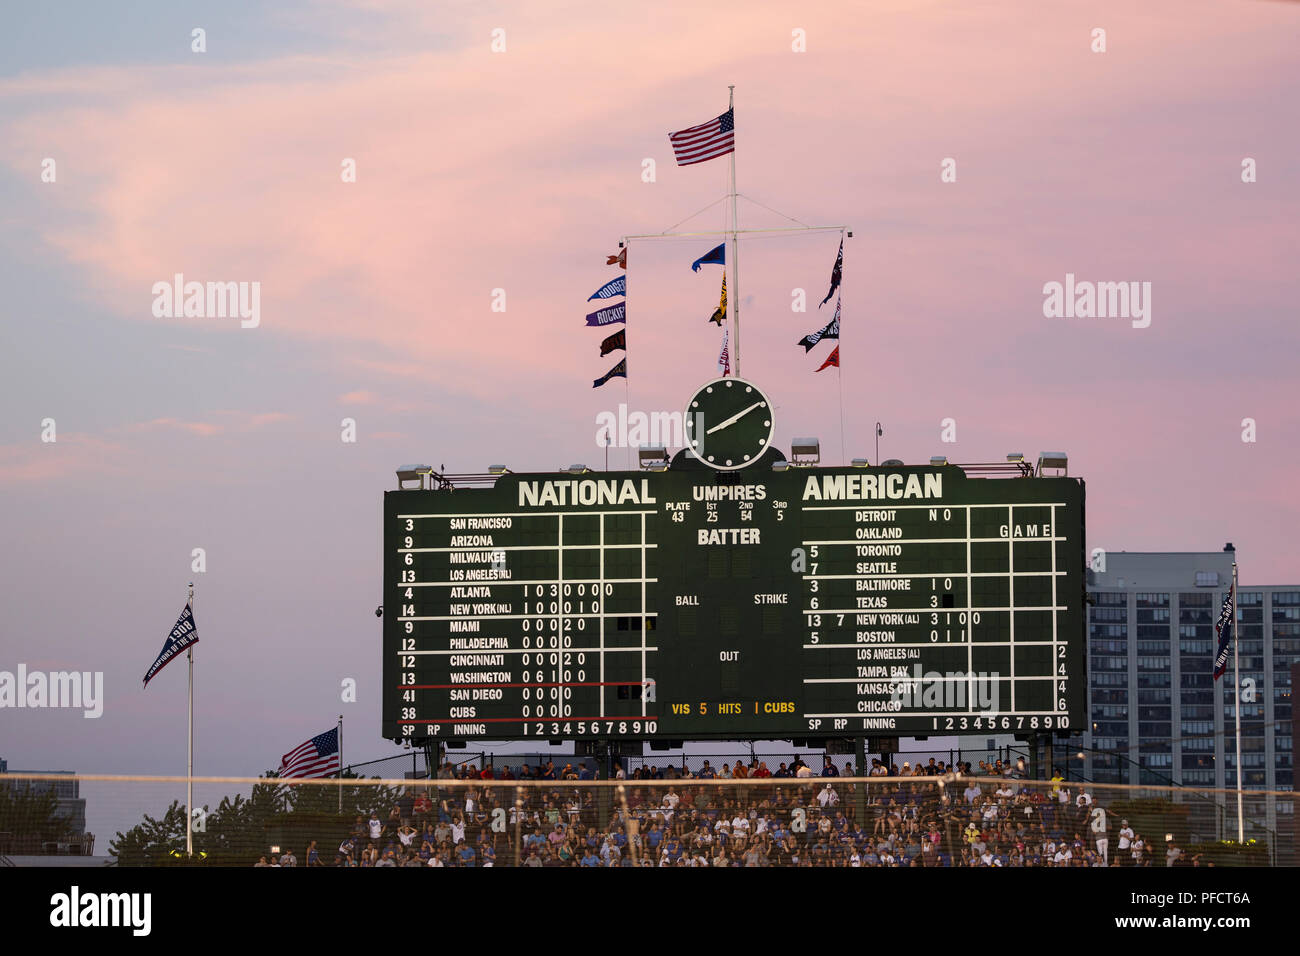 Sunset over Chicago's Wrigley Field, home of the Cubs